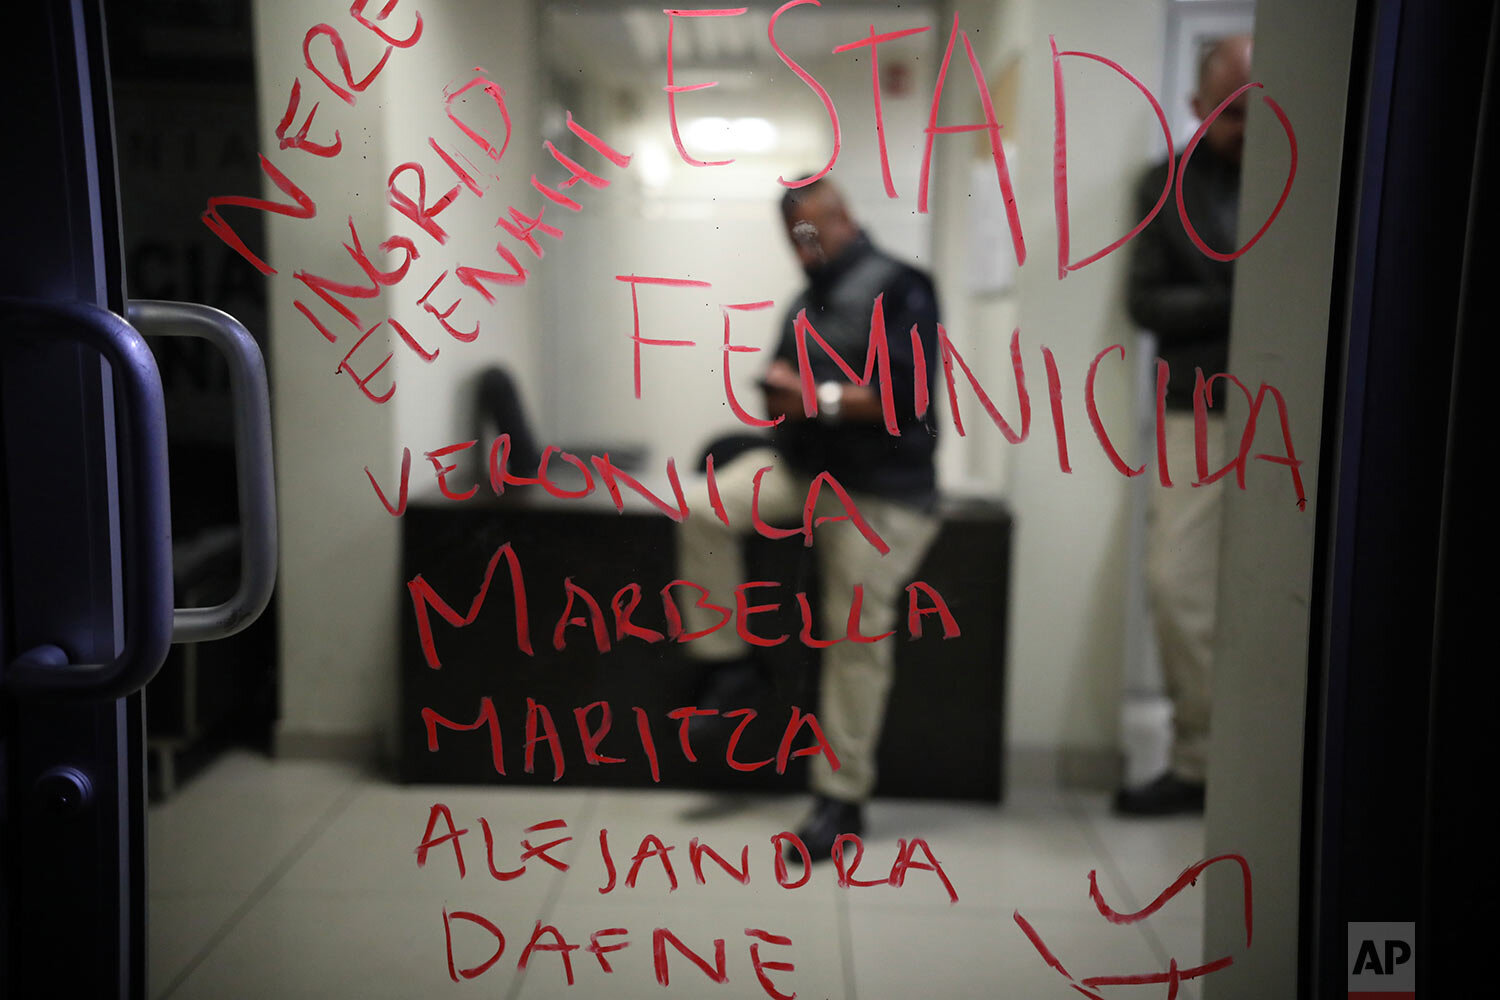  A list of names, written in lipstick, of murdered women and the Spanish words "Femicide state," cover a door at the prosecutor's office where police sit behind, left behind by demonstrators protesting gender violence in Tijuana, Mexico, Saturday, Fe